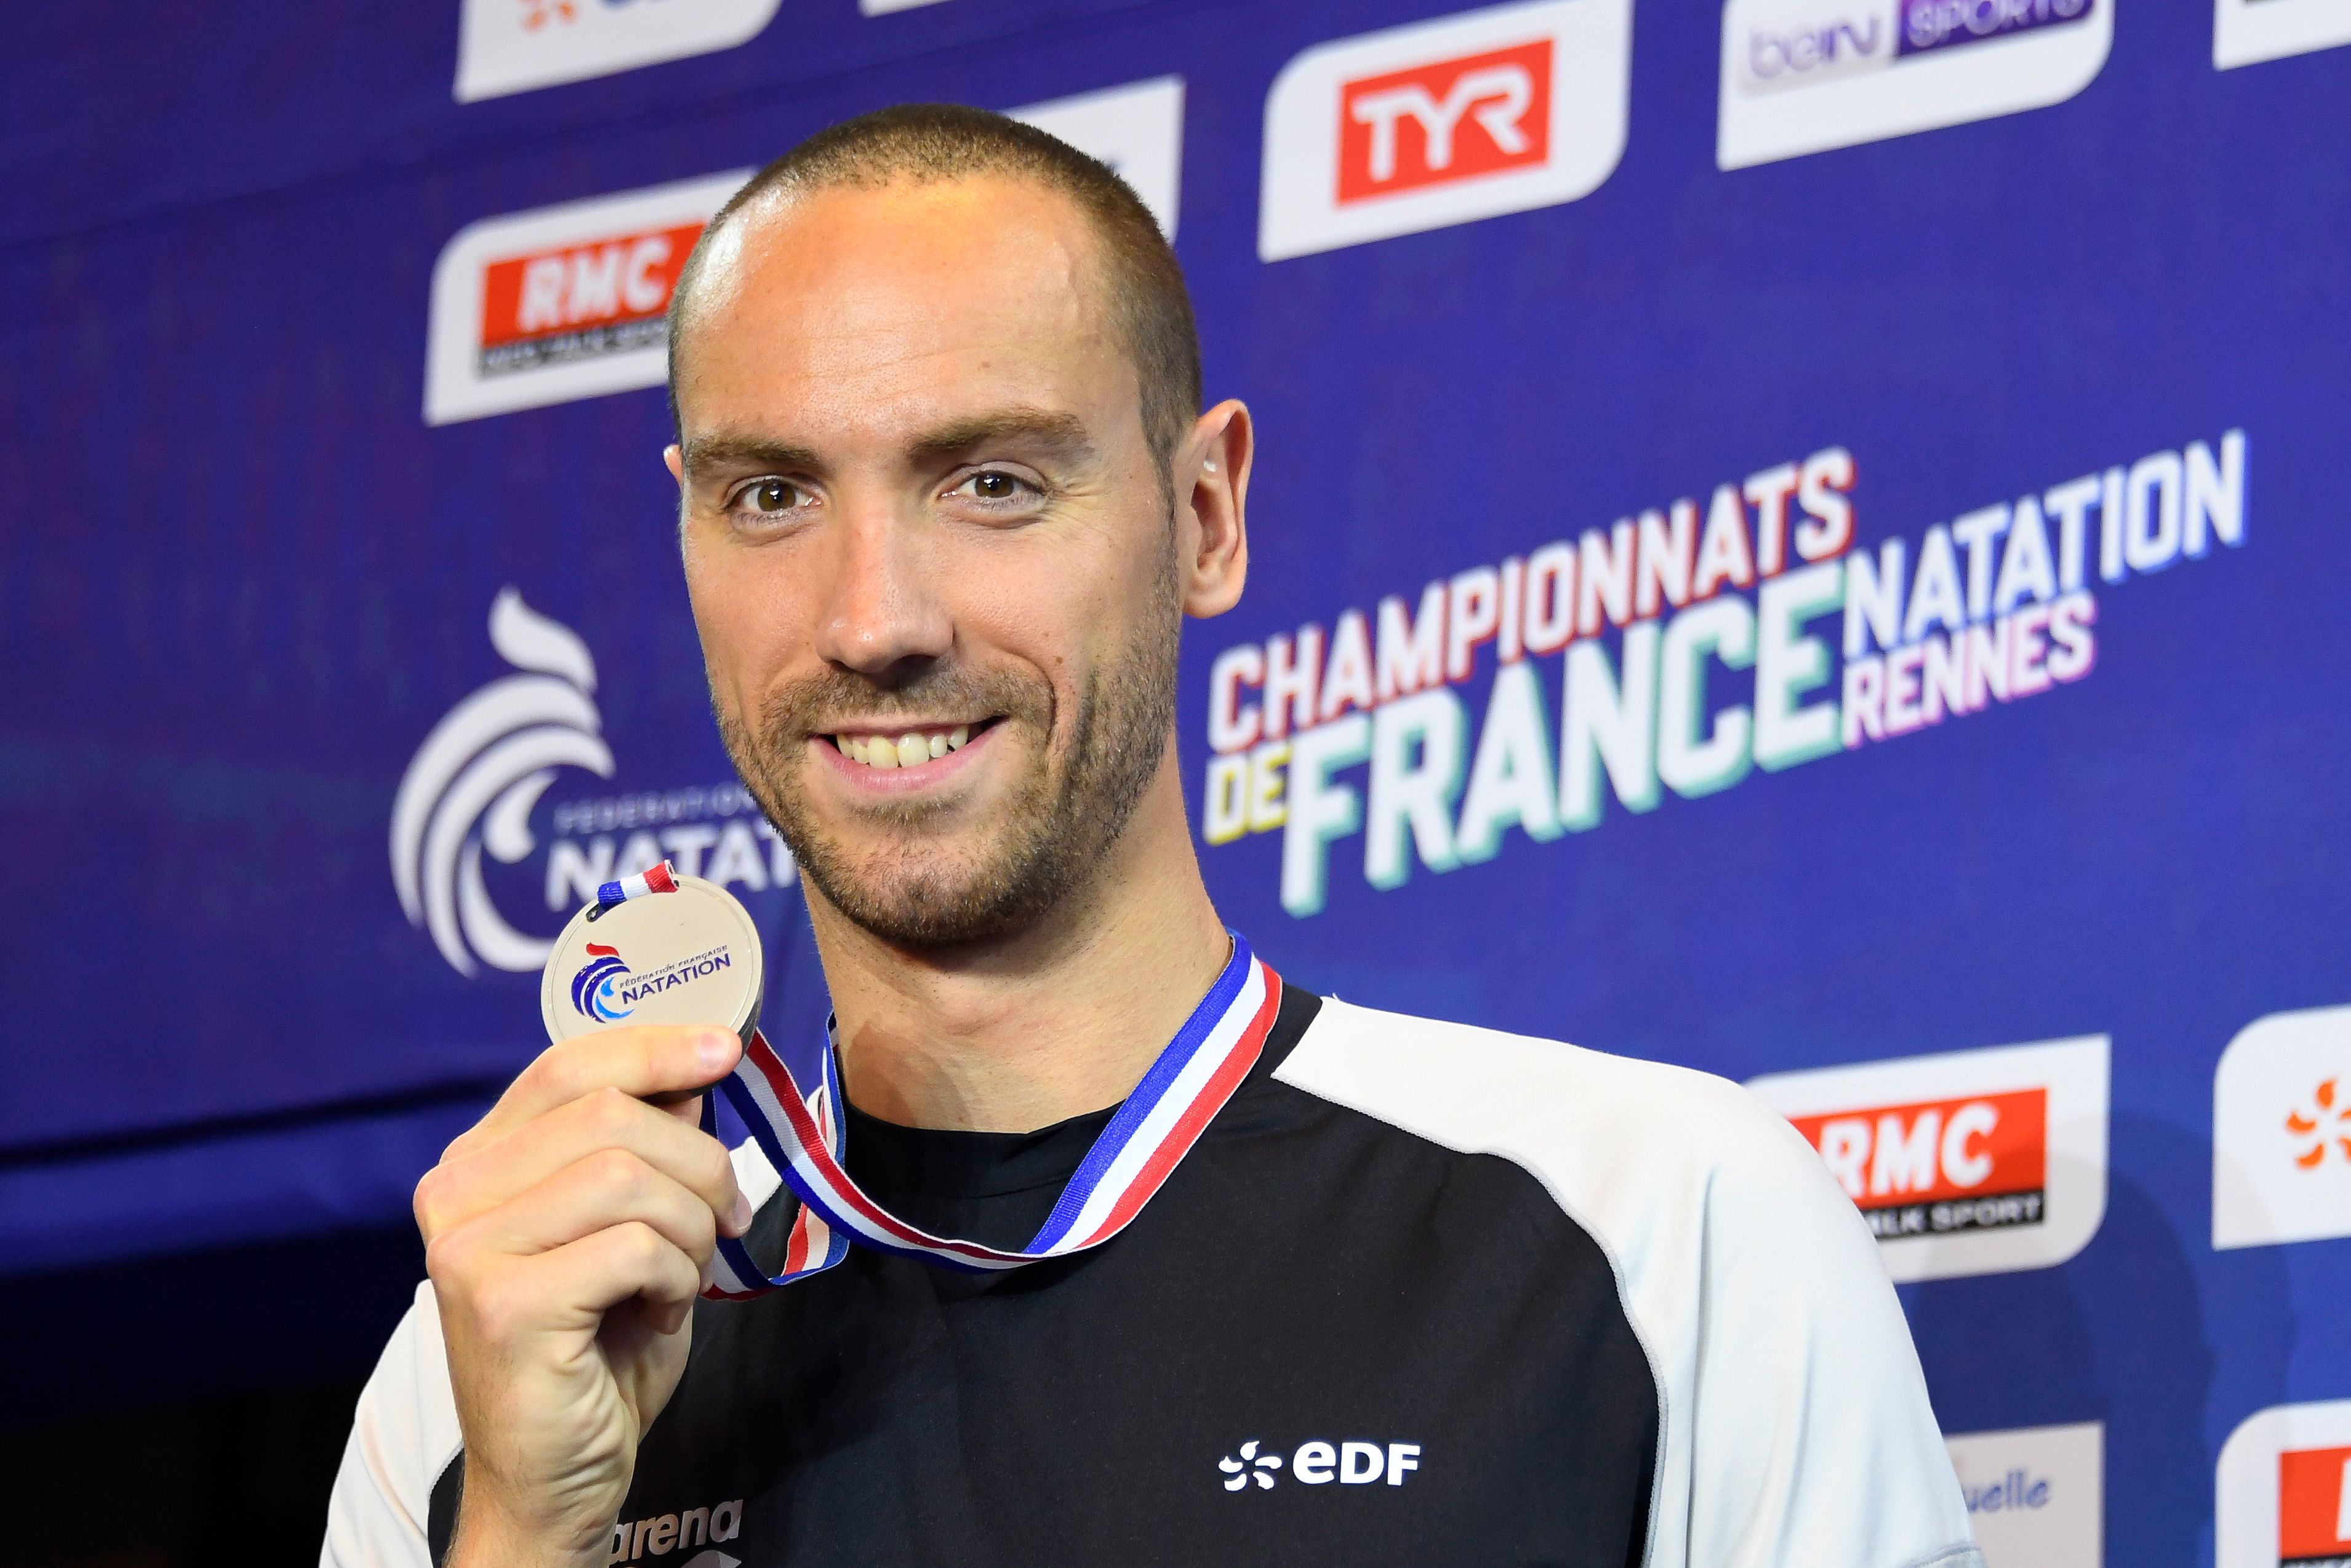 French swimmer Jérémy Stravius with a silver medal at the 2019 French championships.